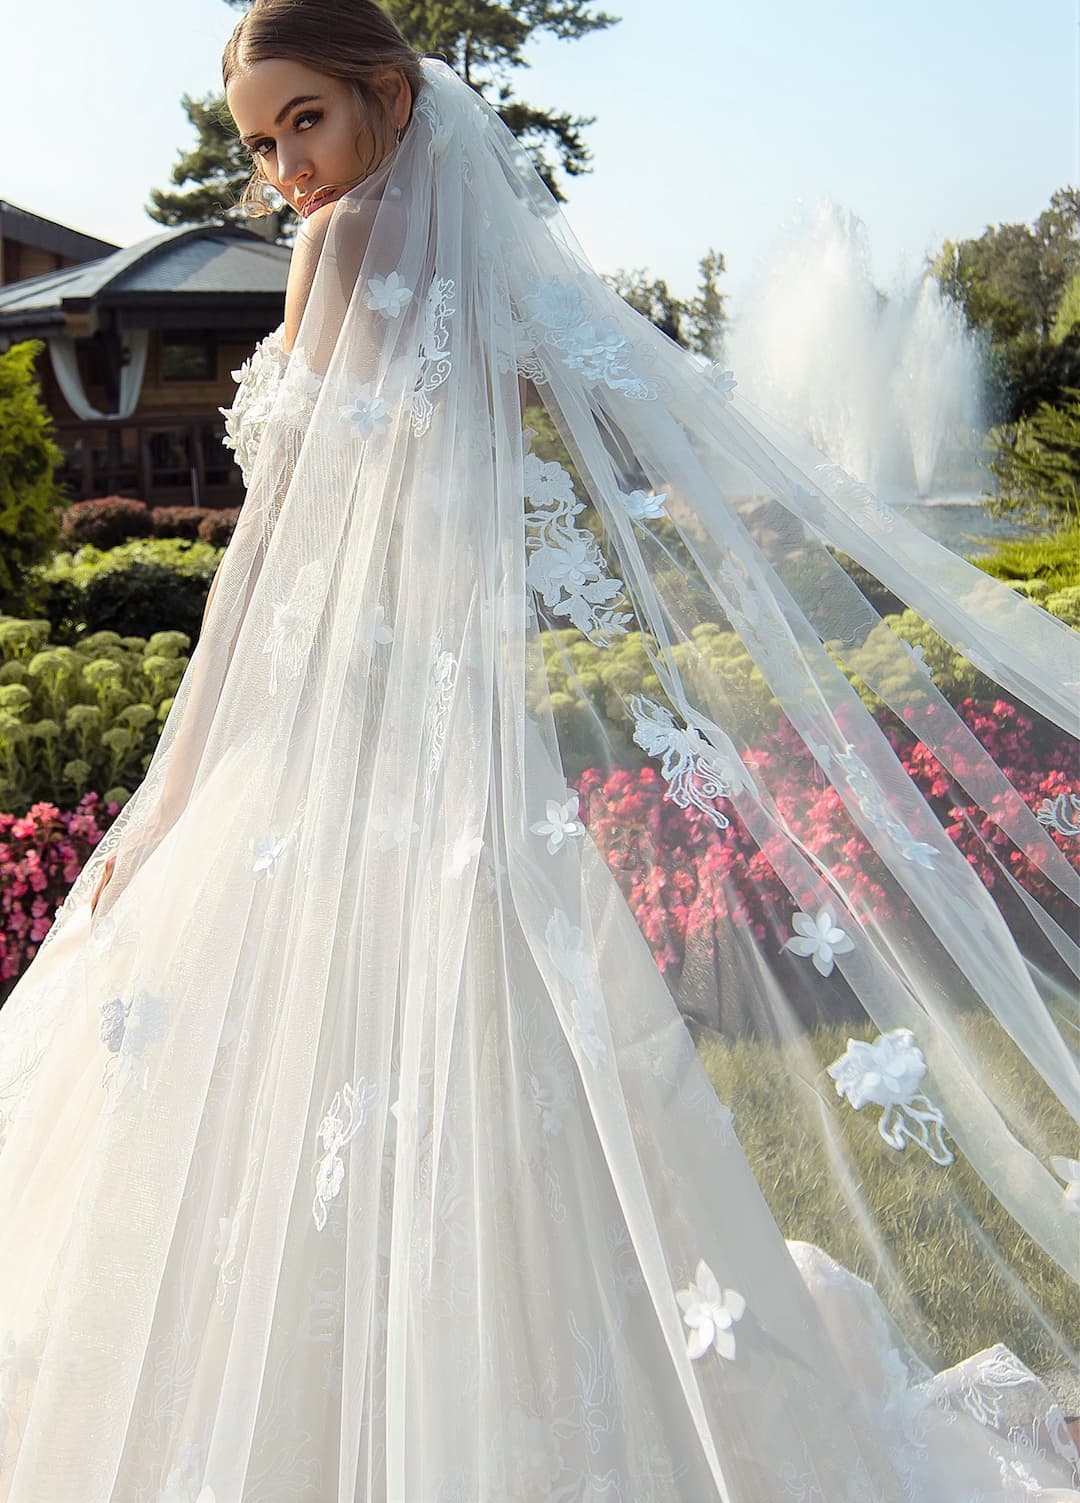 Wedding veil S-521 Product for Sale at NY City Bride